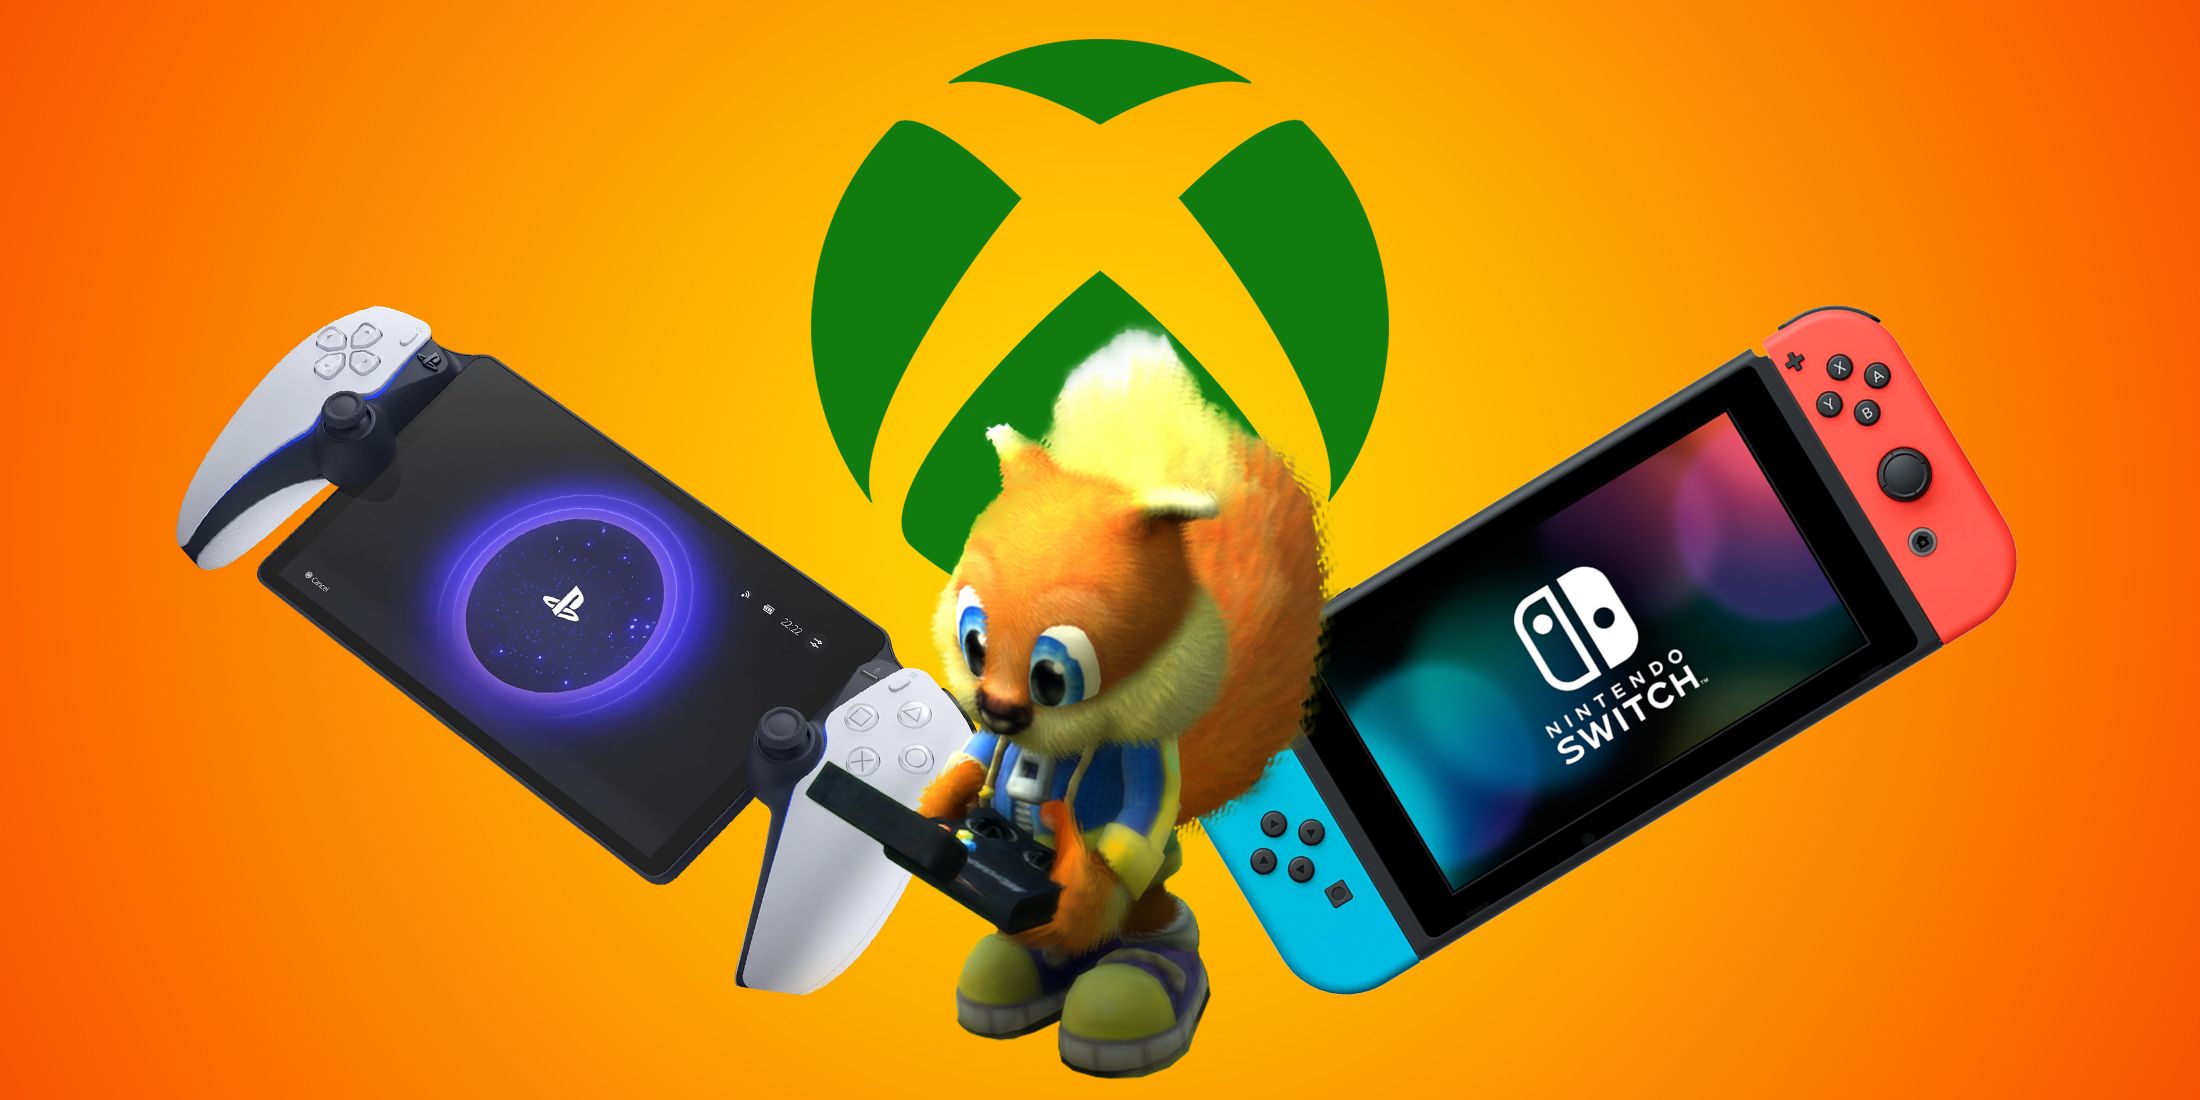 How Could an Xbox Handheld Improve on Other Portable Consoles?